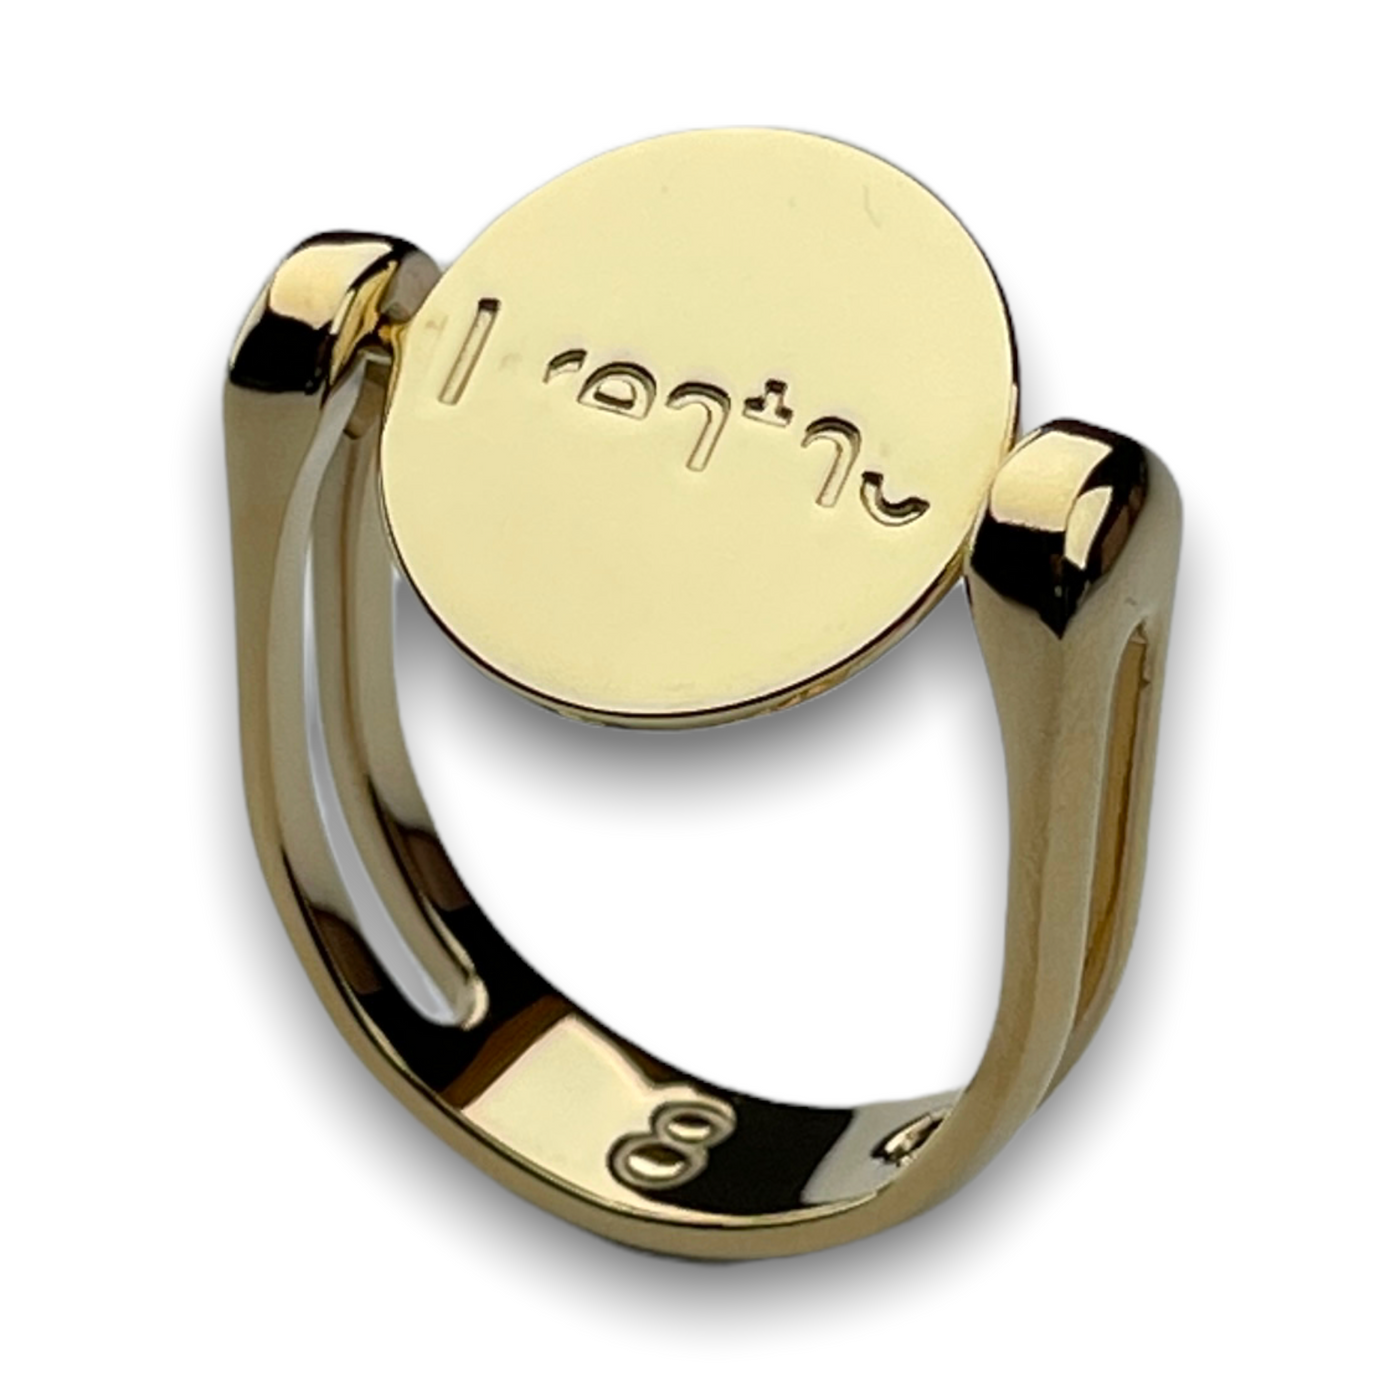 "Breathe" Hidden Word Click n Spin Fidget Ring for Anxiety